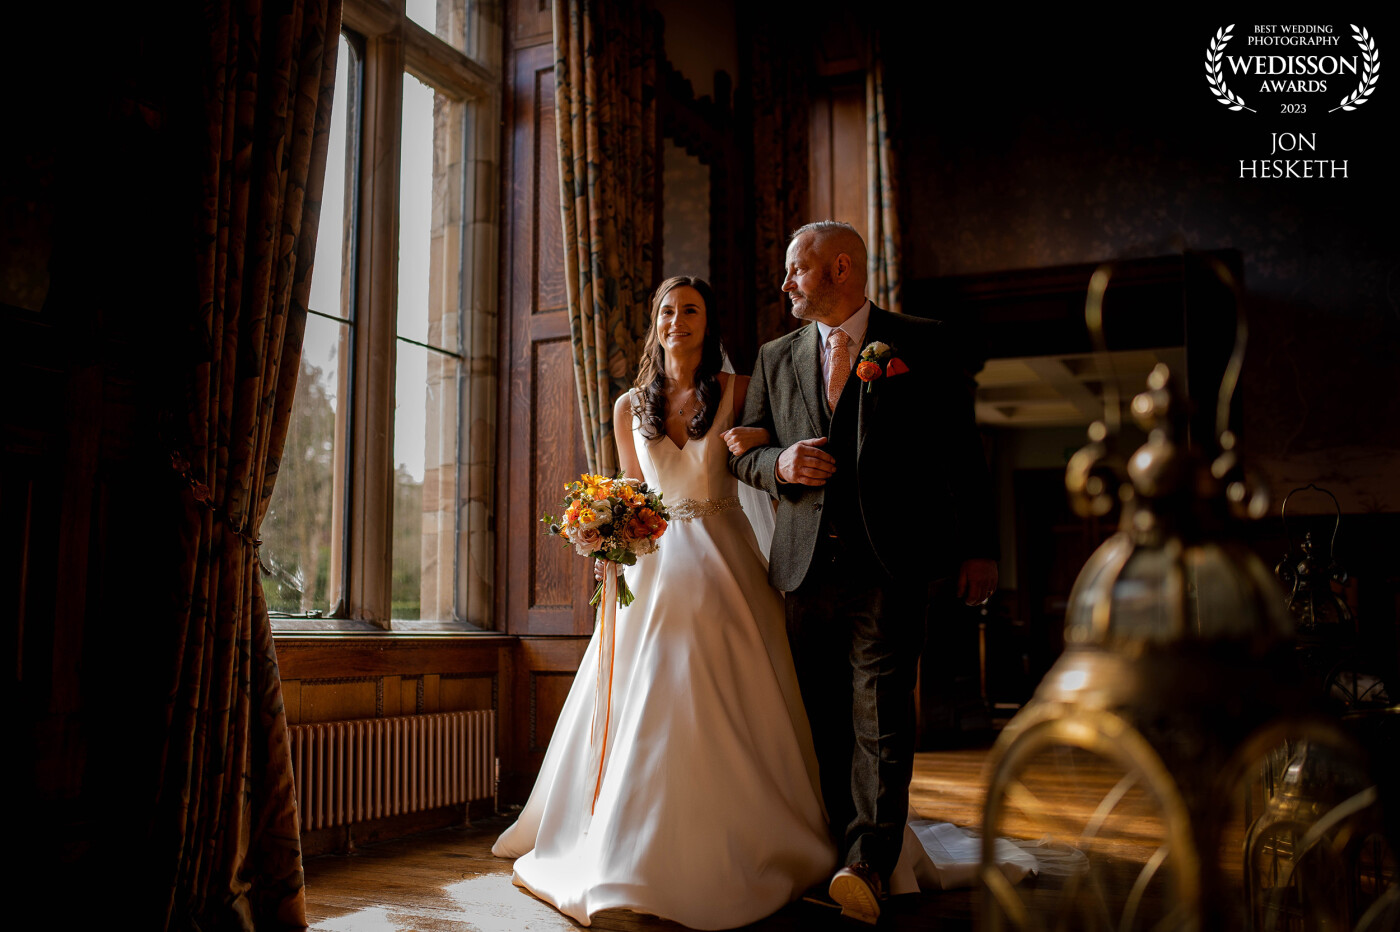 This was my first time at Soughton Hall, what and amazingly beautiful venue, I’m so happy with this image as the father of the bride was so proud and emotional. This just tops it off.